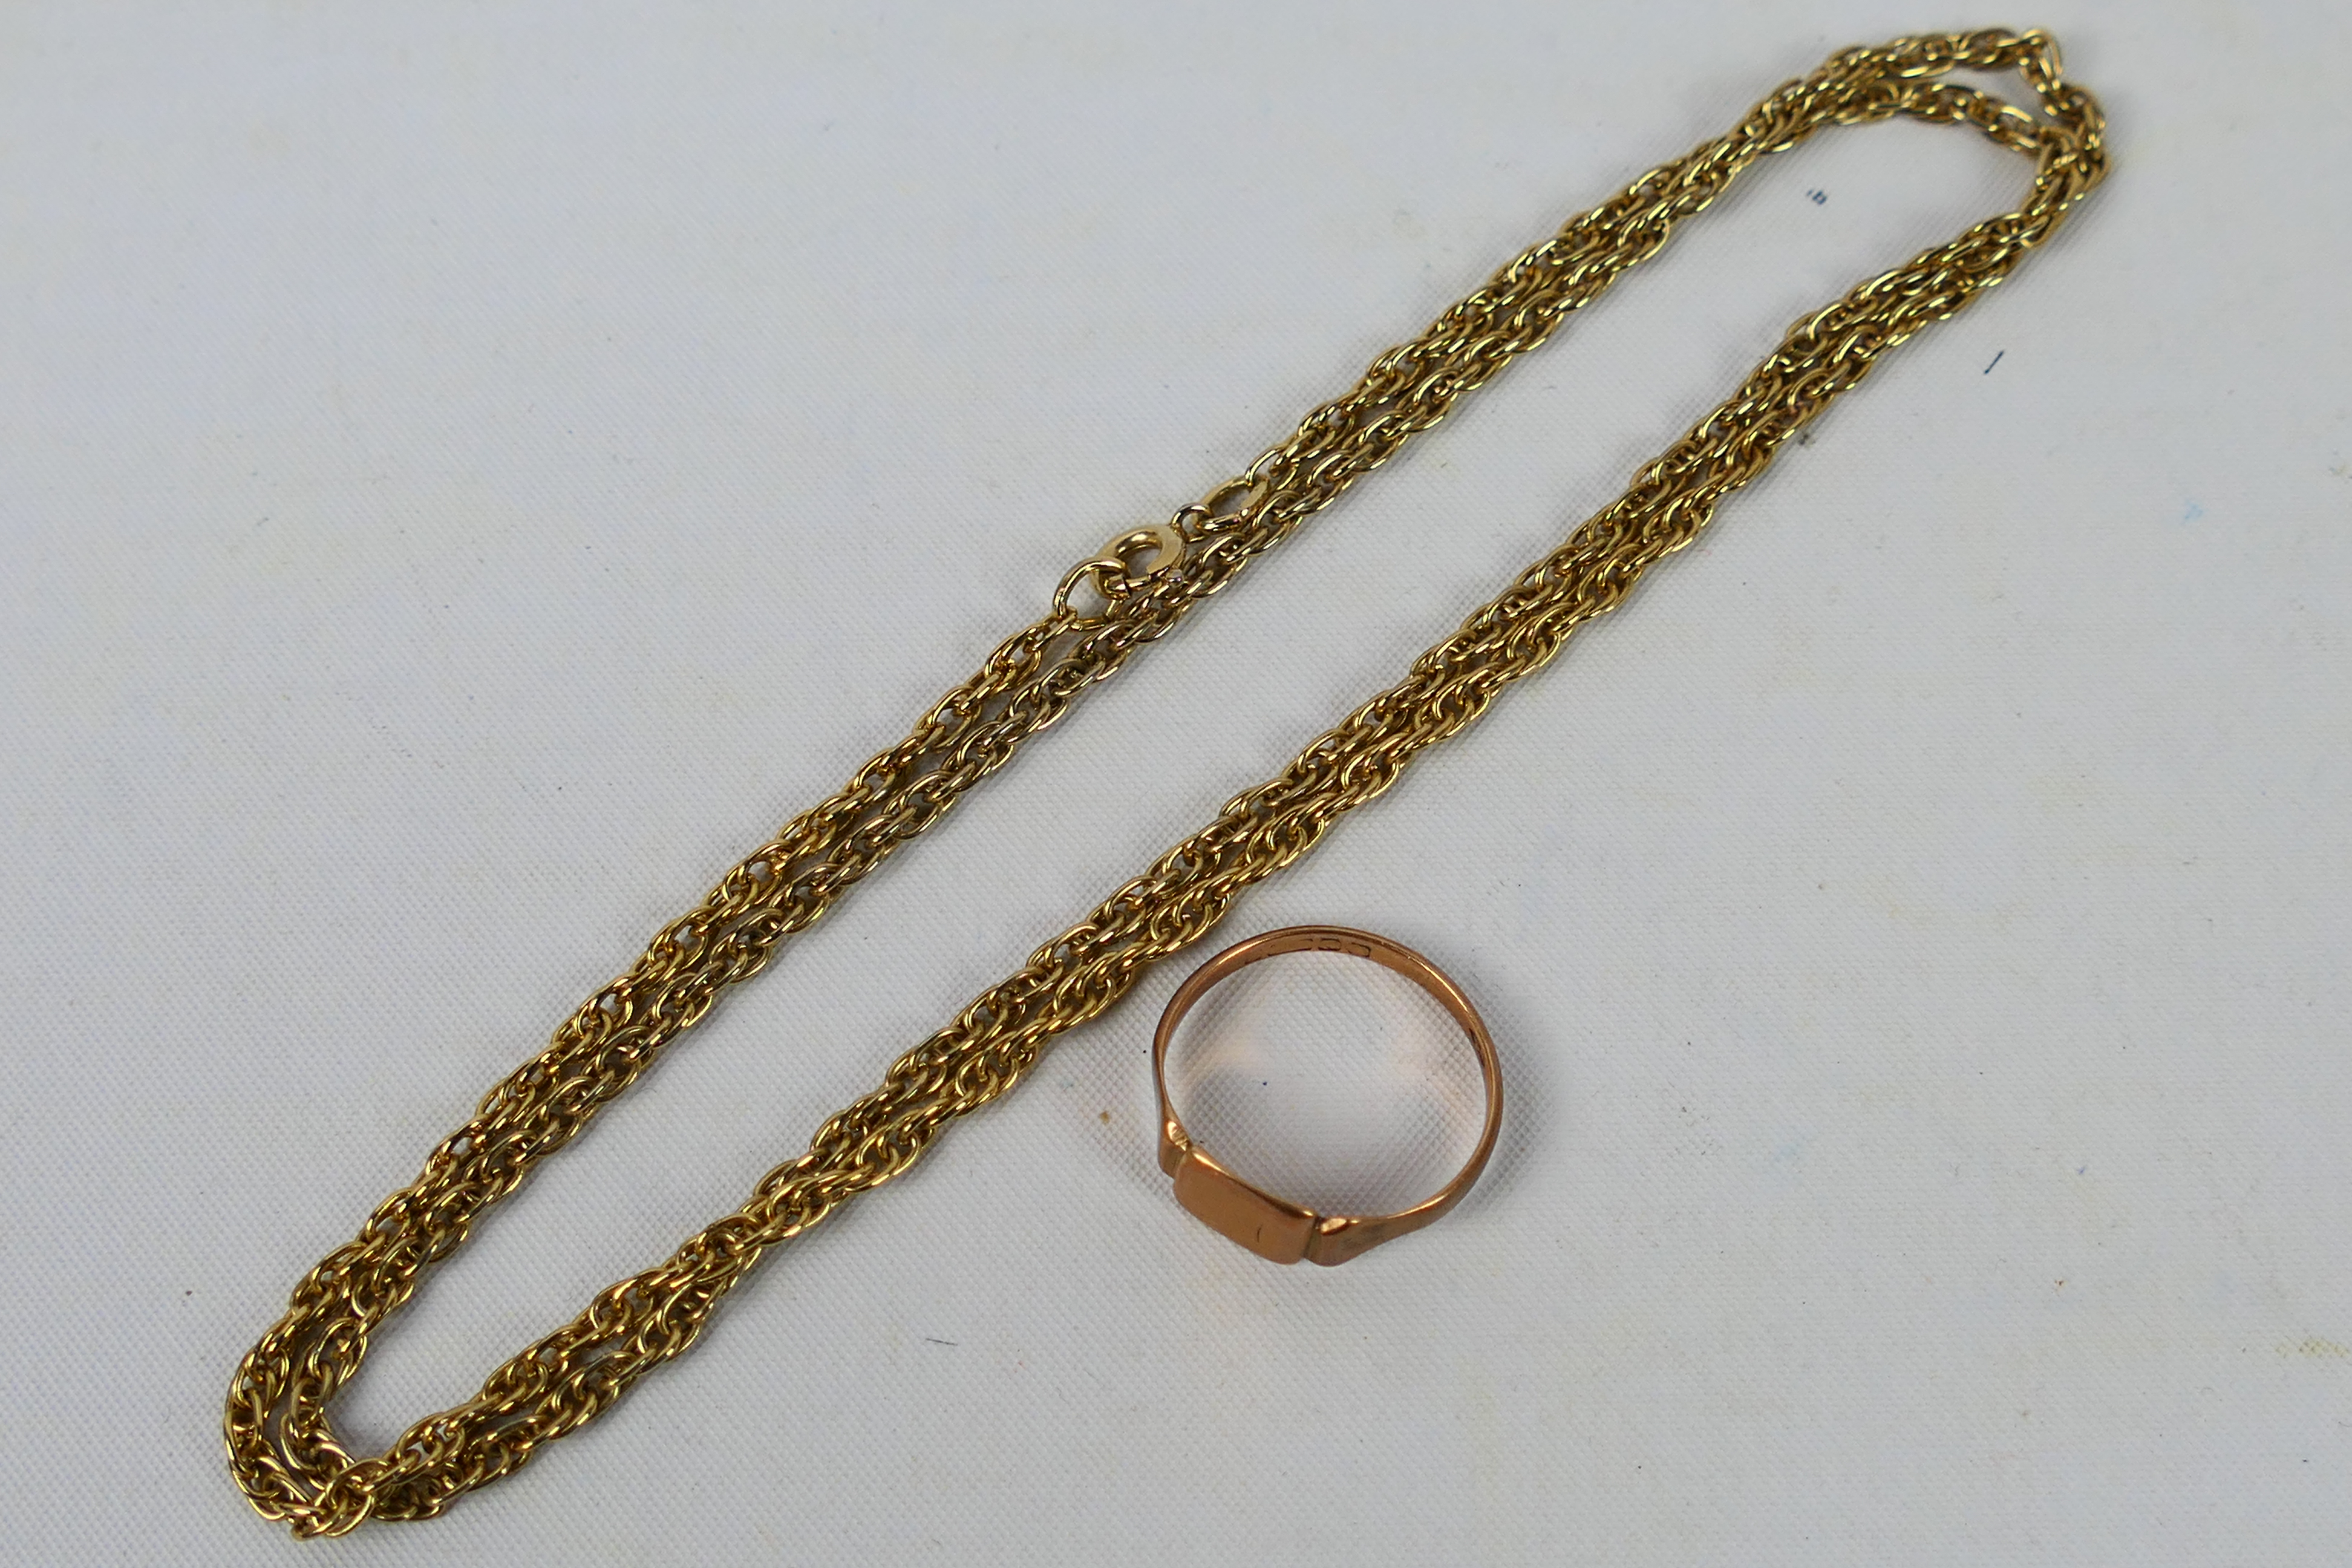 A rose gold ring (hallmarks very rubbed but presumed 9ct) and an unmarked yellow metal chain,